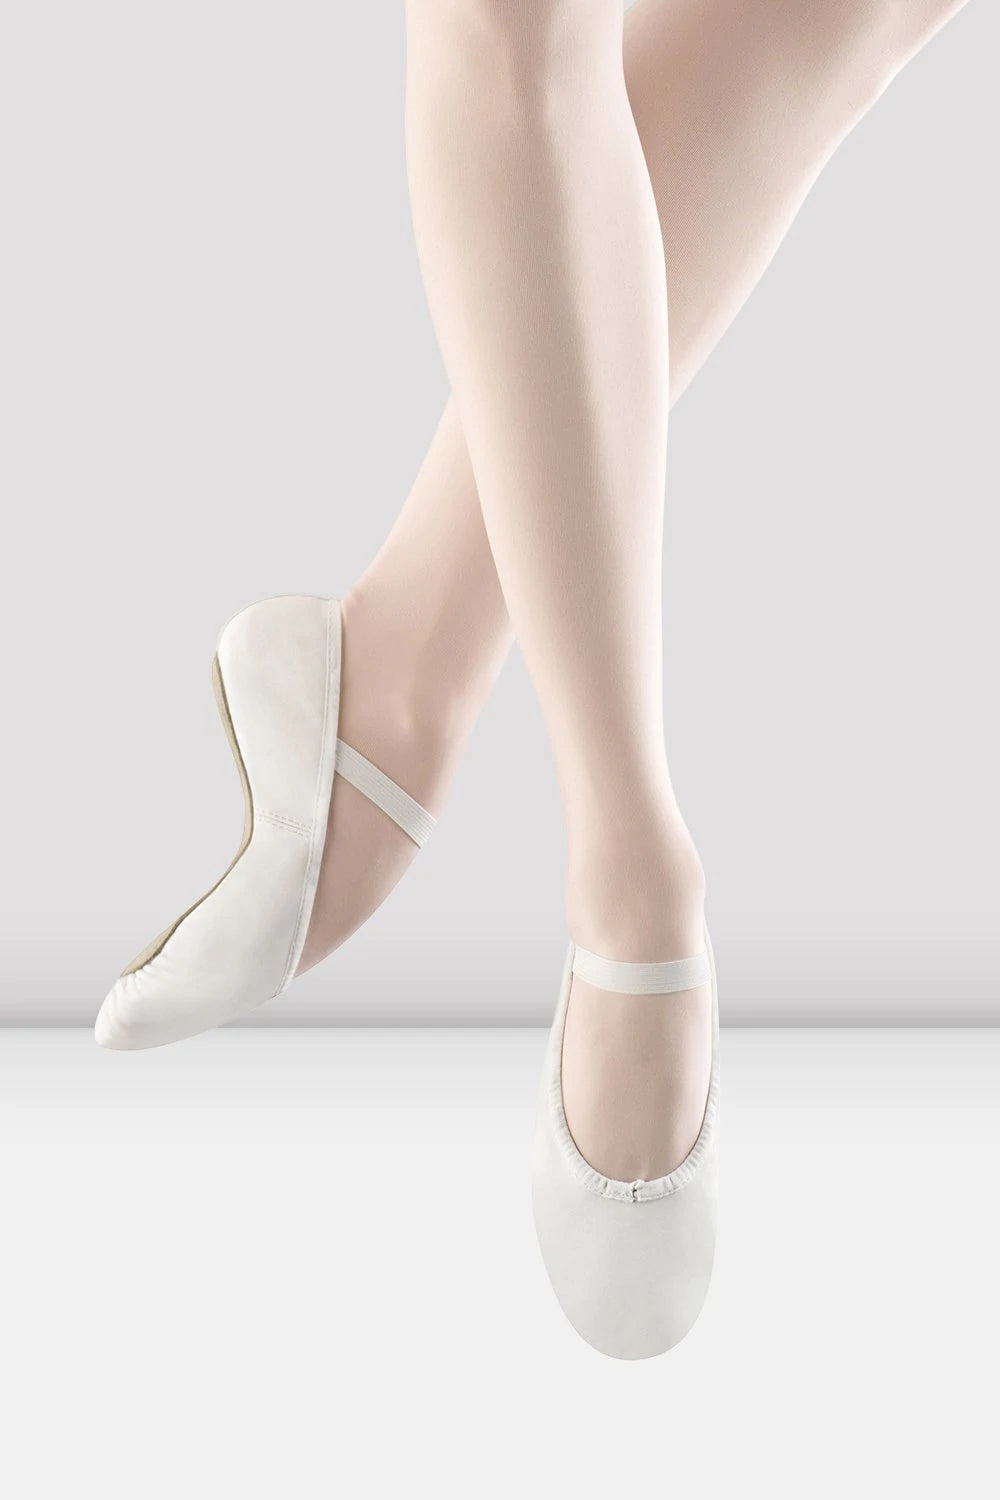 50% OFF Bloch Dansoft Leather Full Sole Ballet Shoes  #205- White